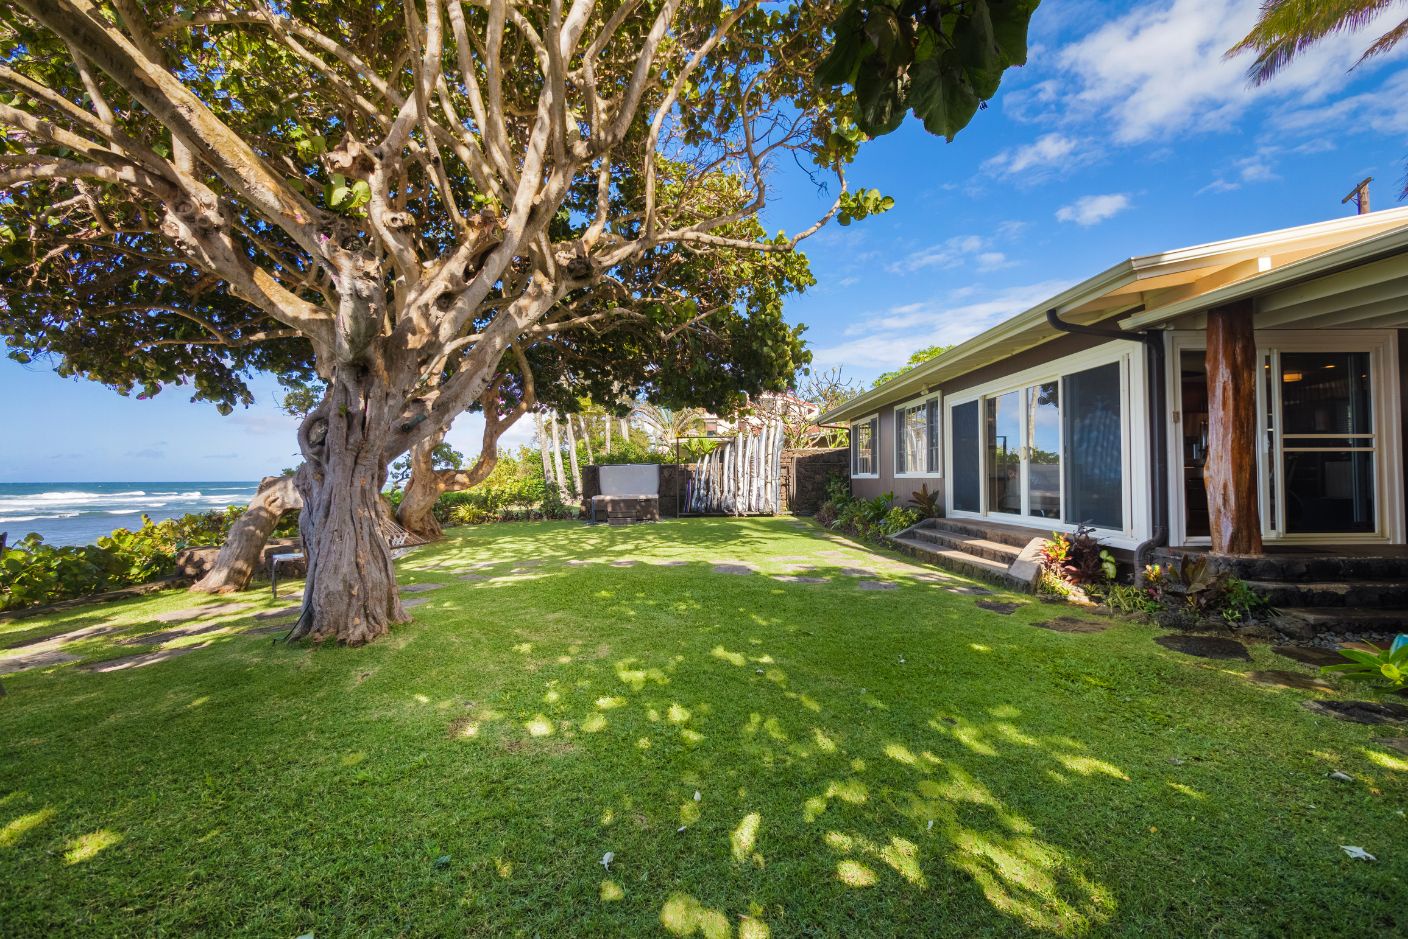 Haleiwa Vacation Rentals, Sunset Point Hawaiian Beachfront** - Picturesque ocean views right at the backyard.